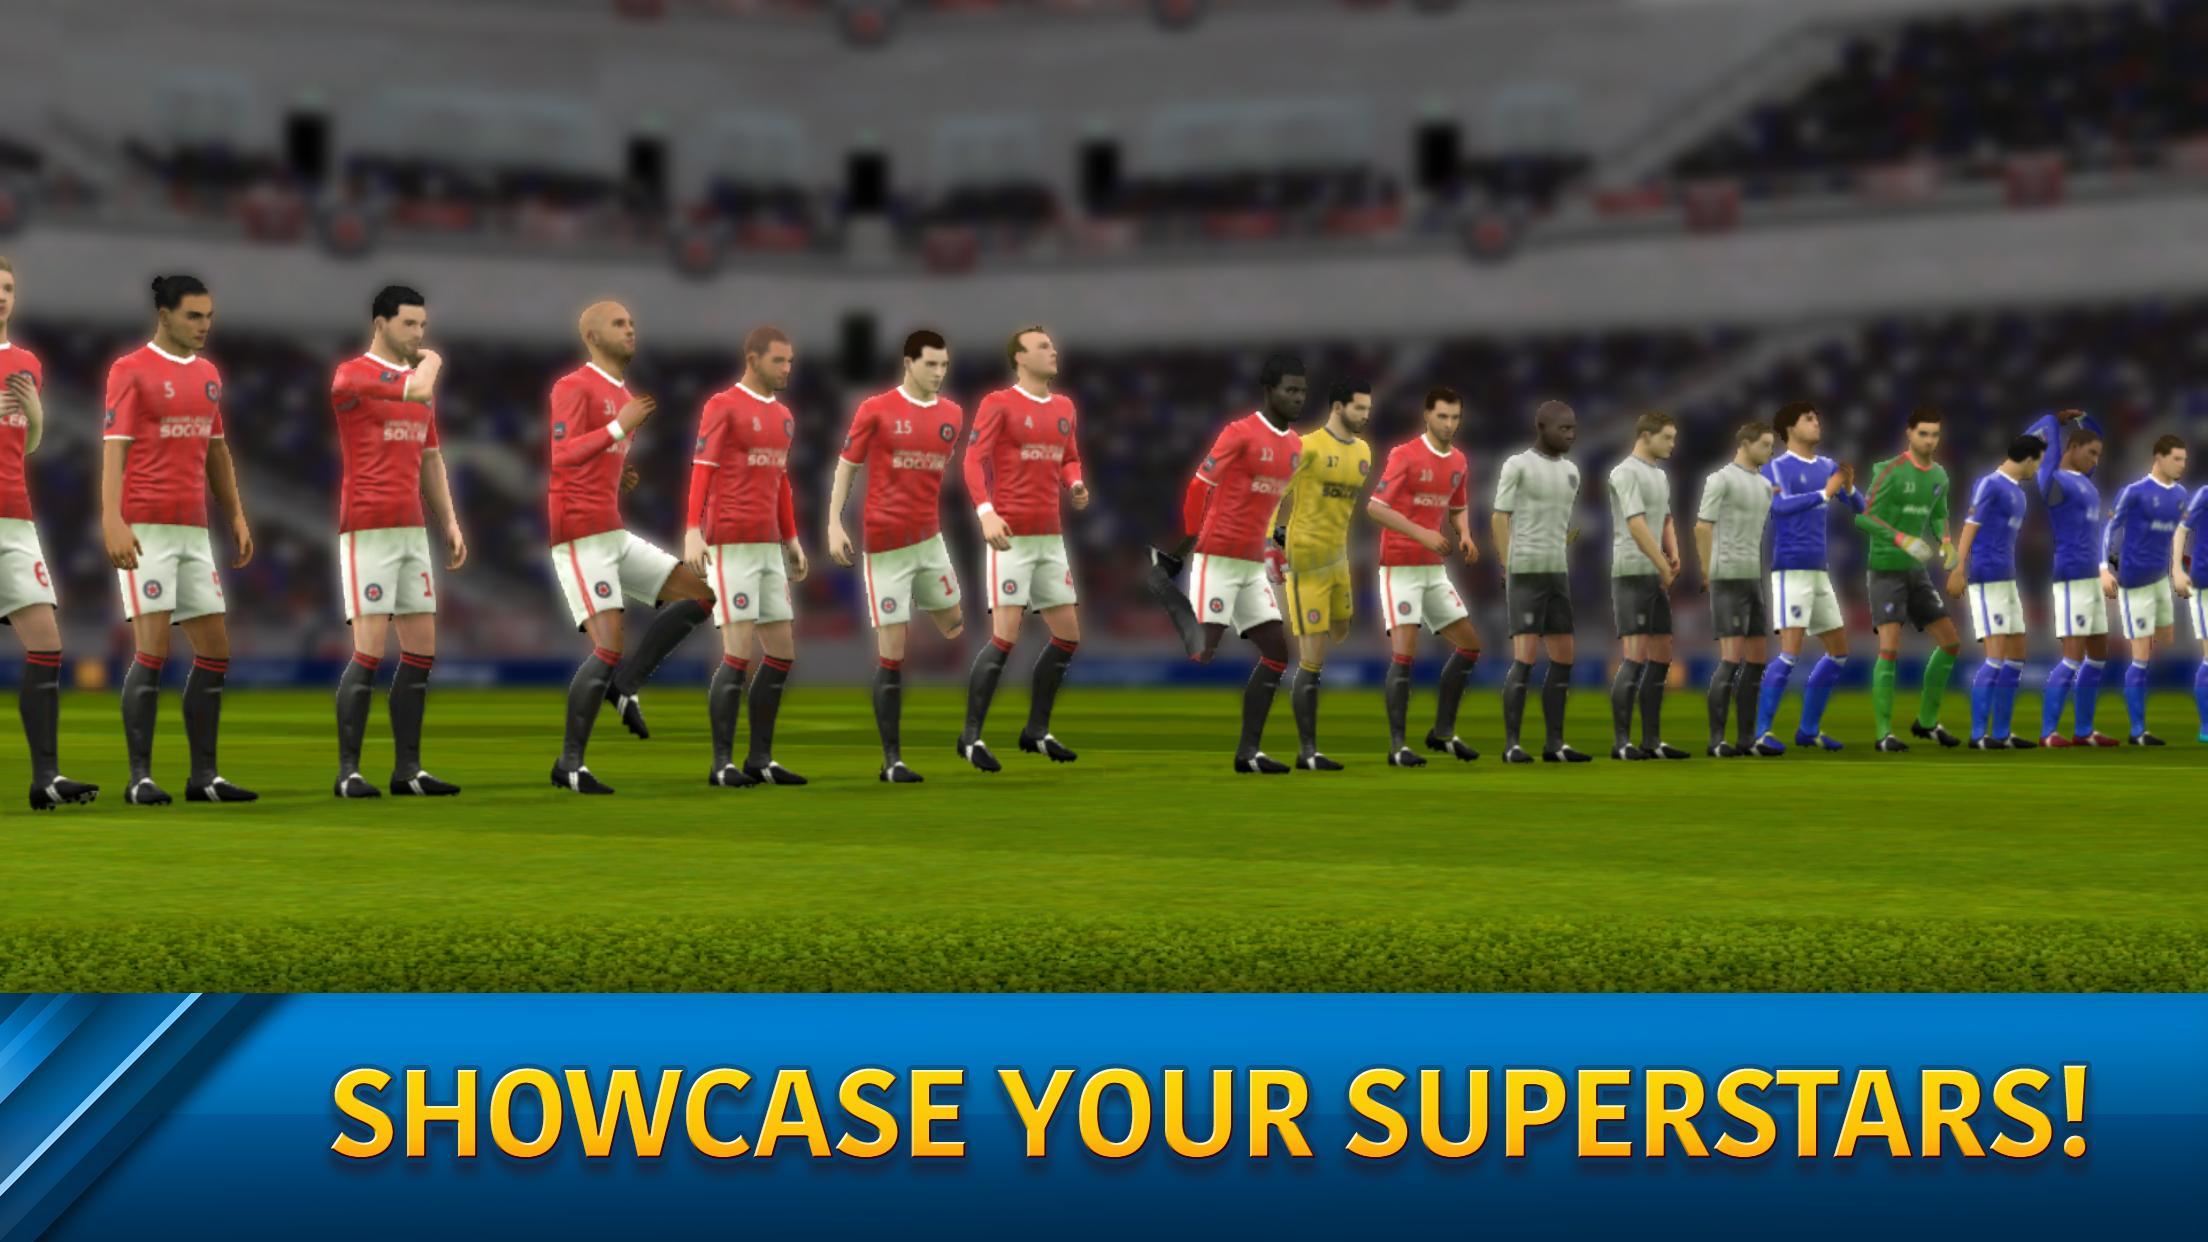 guide for fifa 15 unlimited pro APK + Mod for Android.